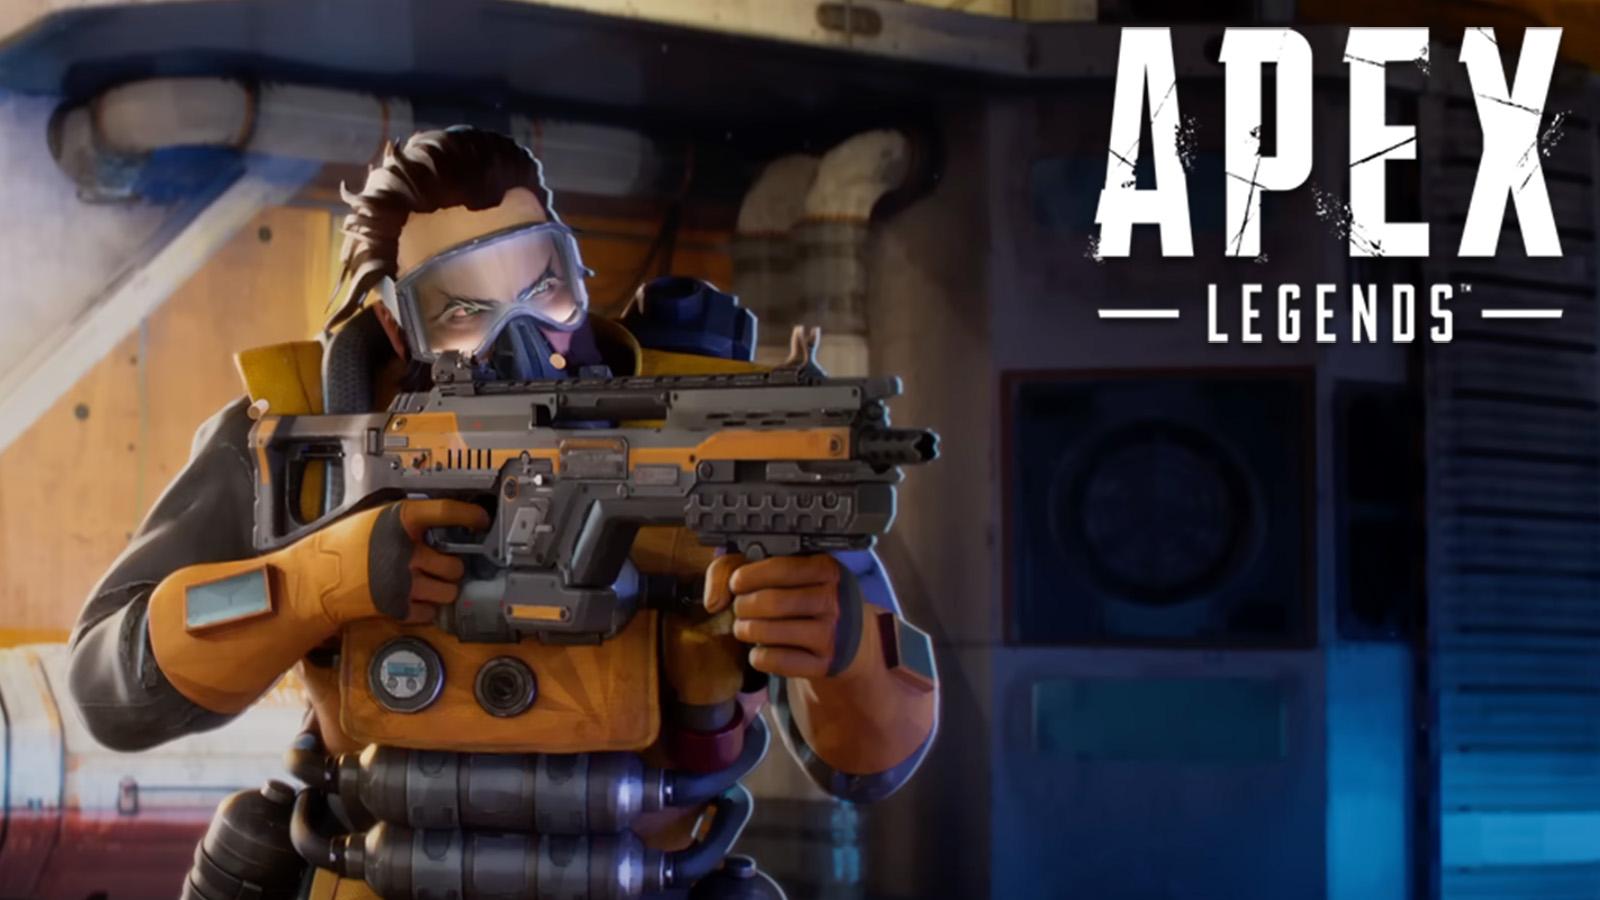 Caustic with SMG in Apex Legends Eclipse trailer